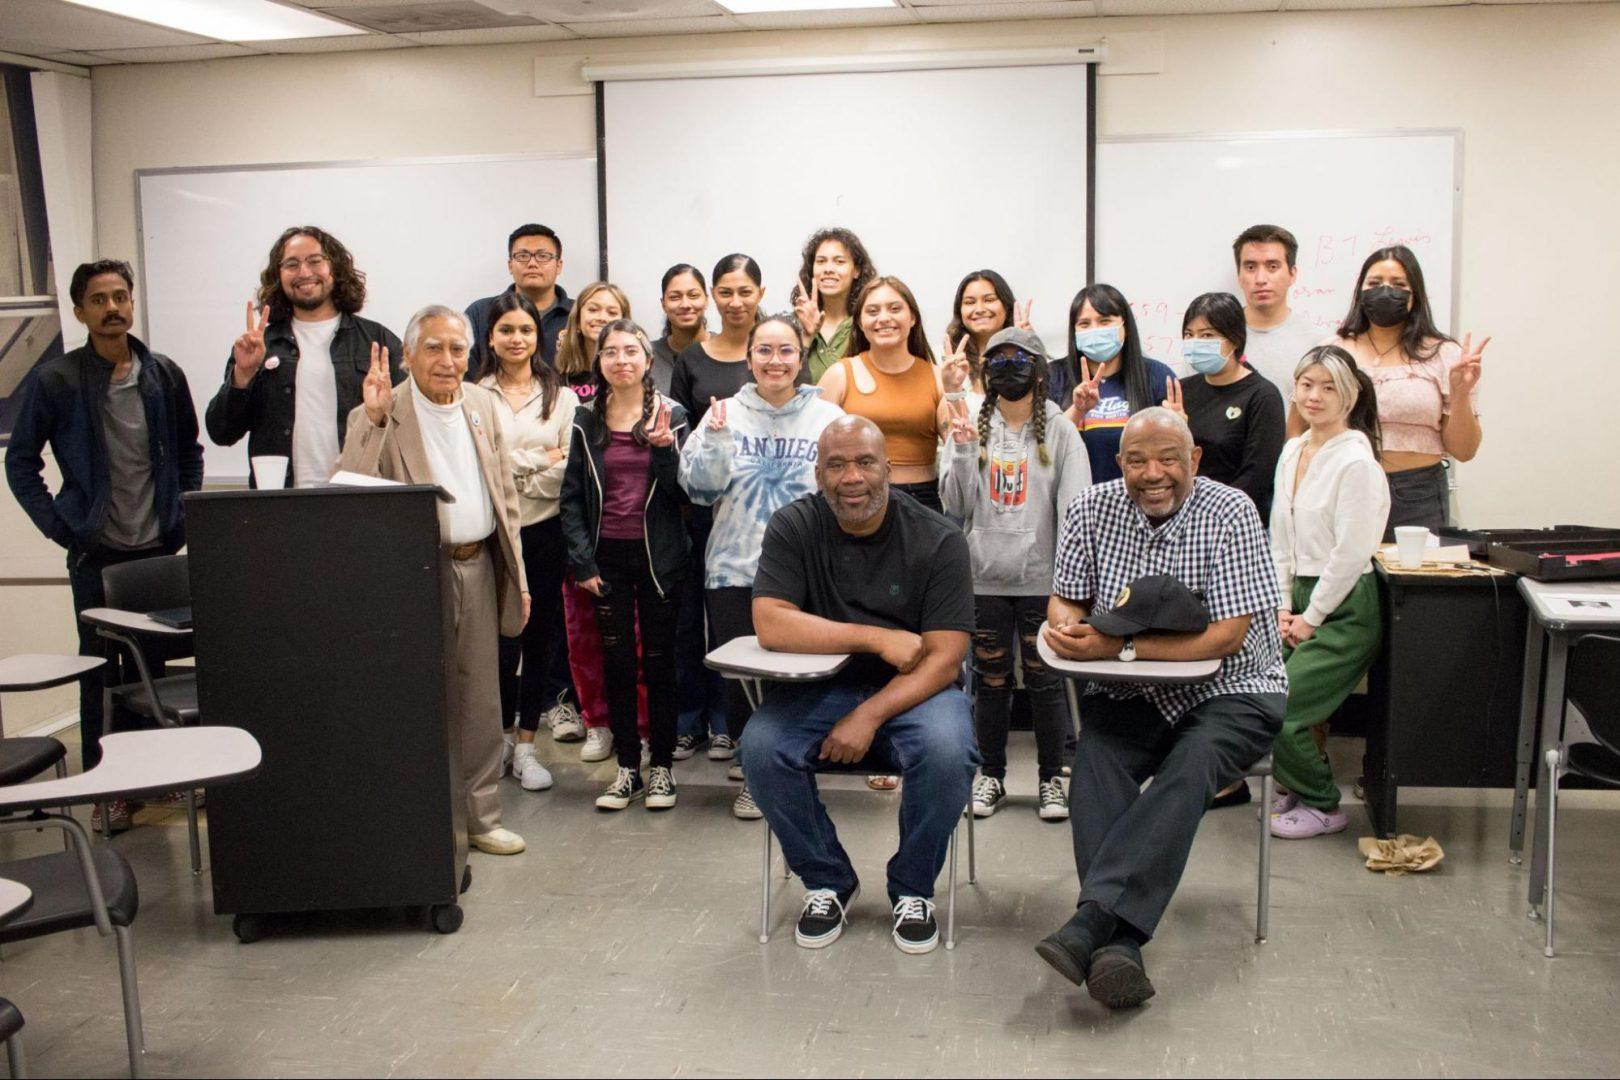 Fresno+State+professor+Sudarshan+Kapoor+held+a+discussion+in+his+classroom+about+gun+violence+on+April+27%2C+2022.+%28Julia+Espinoza%2FThe+Collegian%29